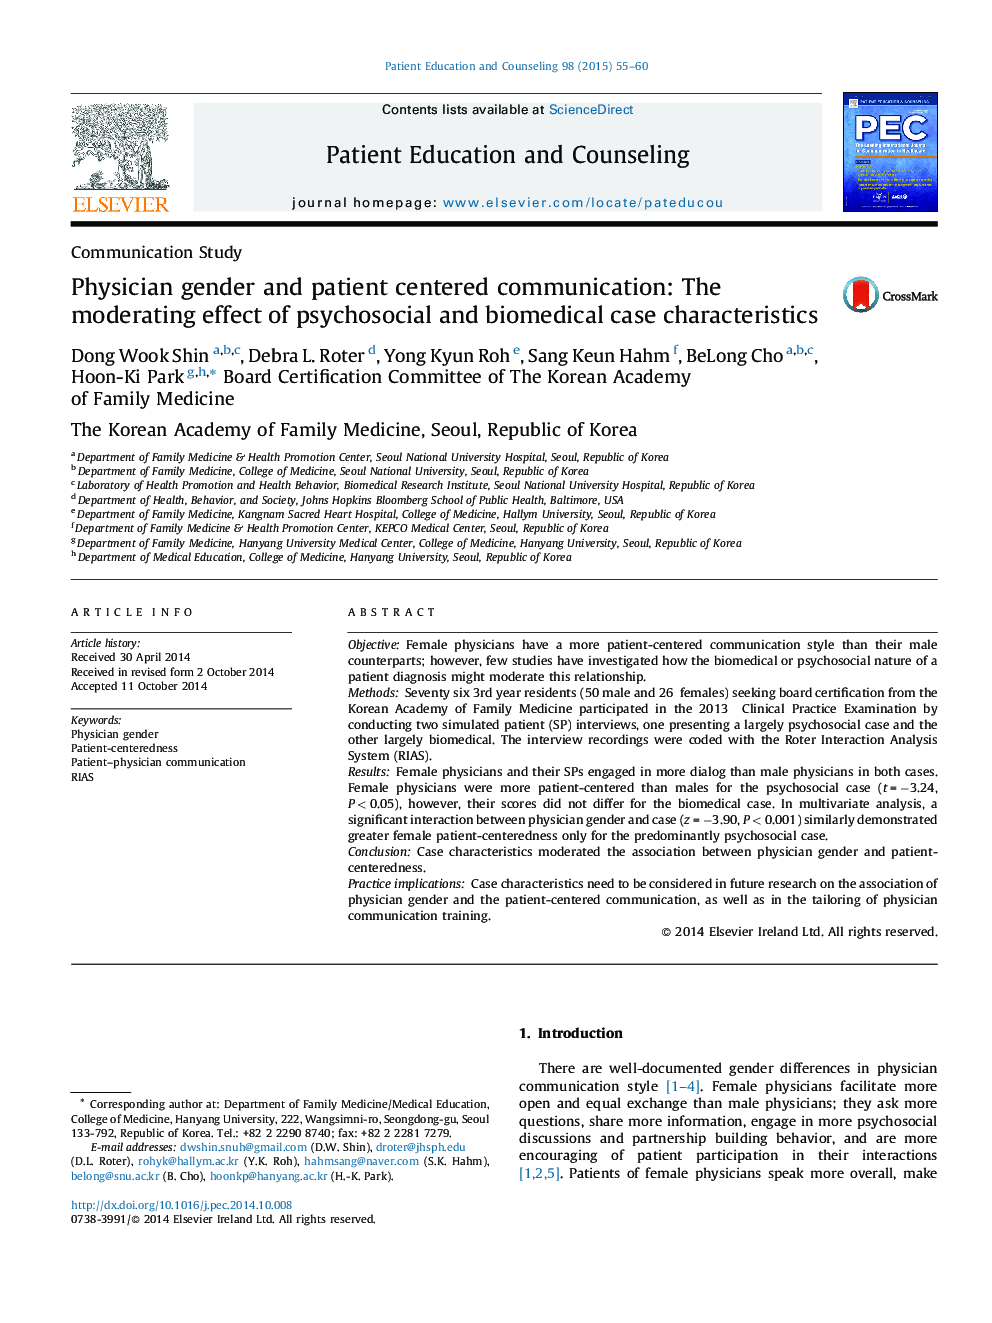 Physician gender and patient centered communication: The moderating effect of psychosocial and biomedical case characteristics